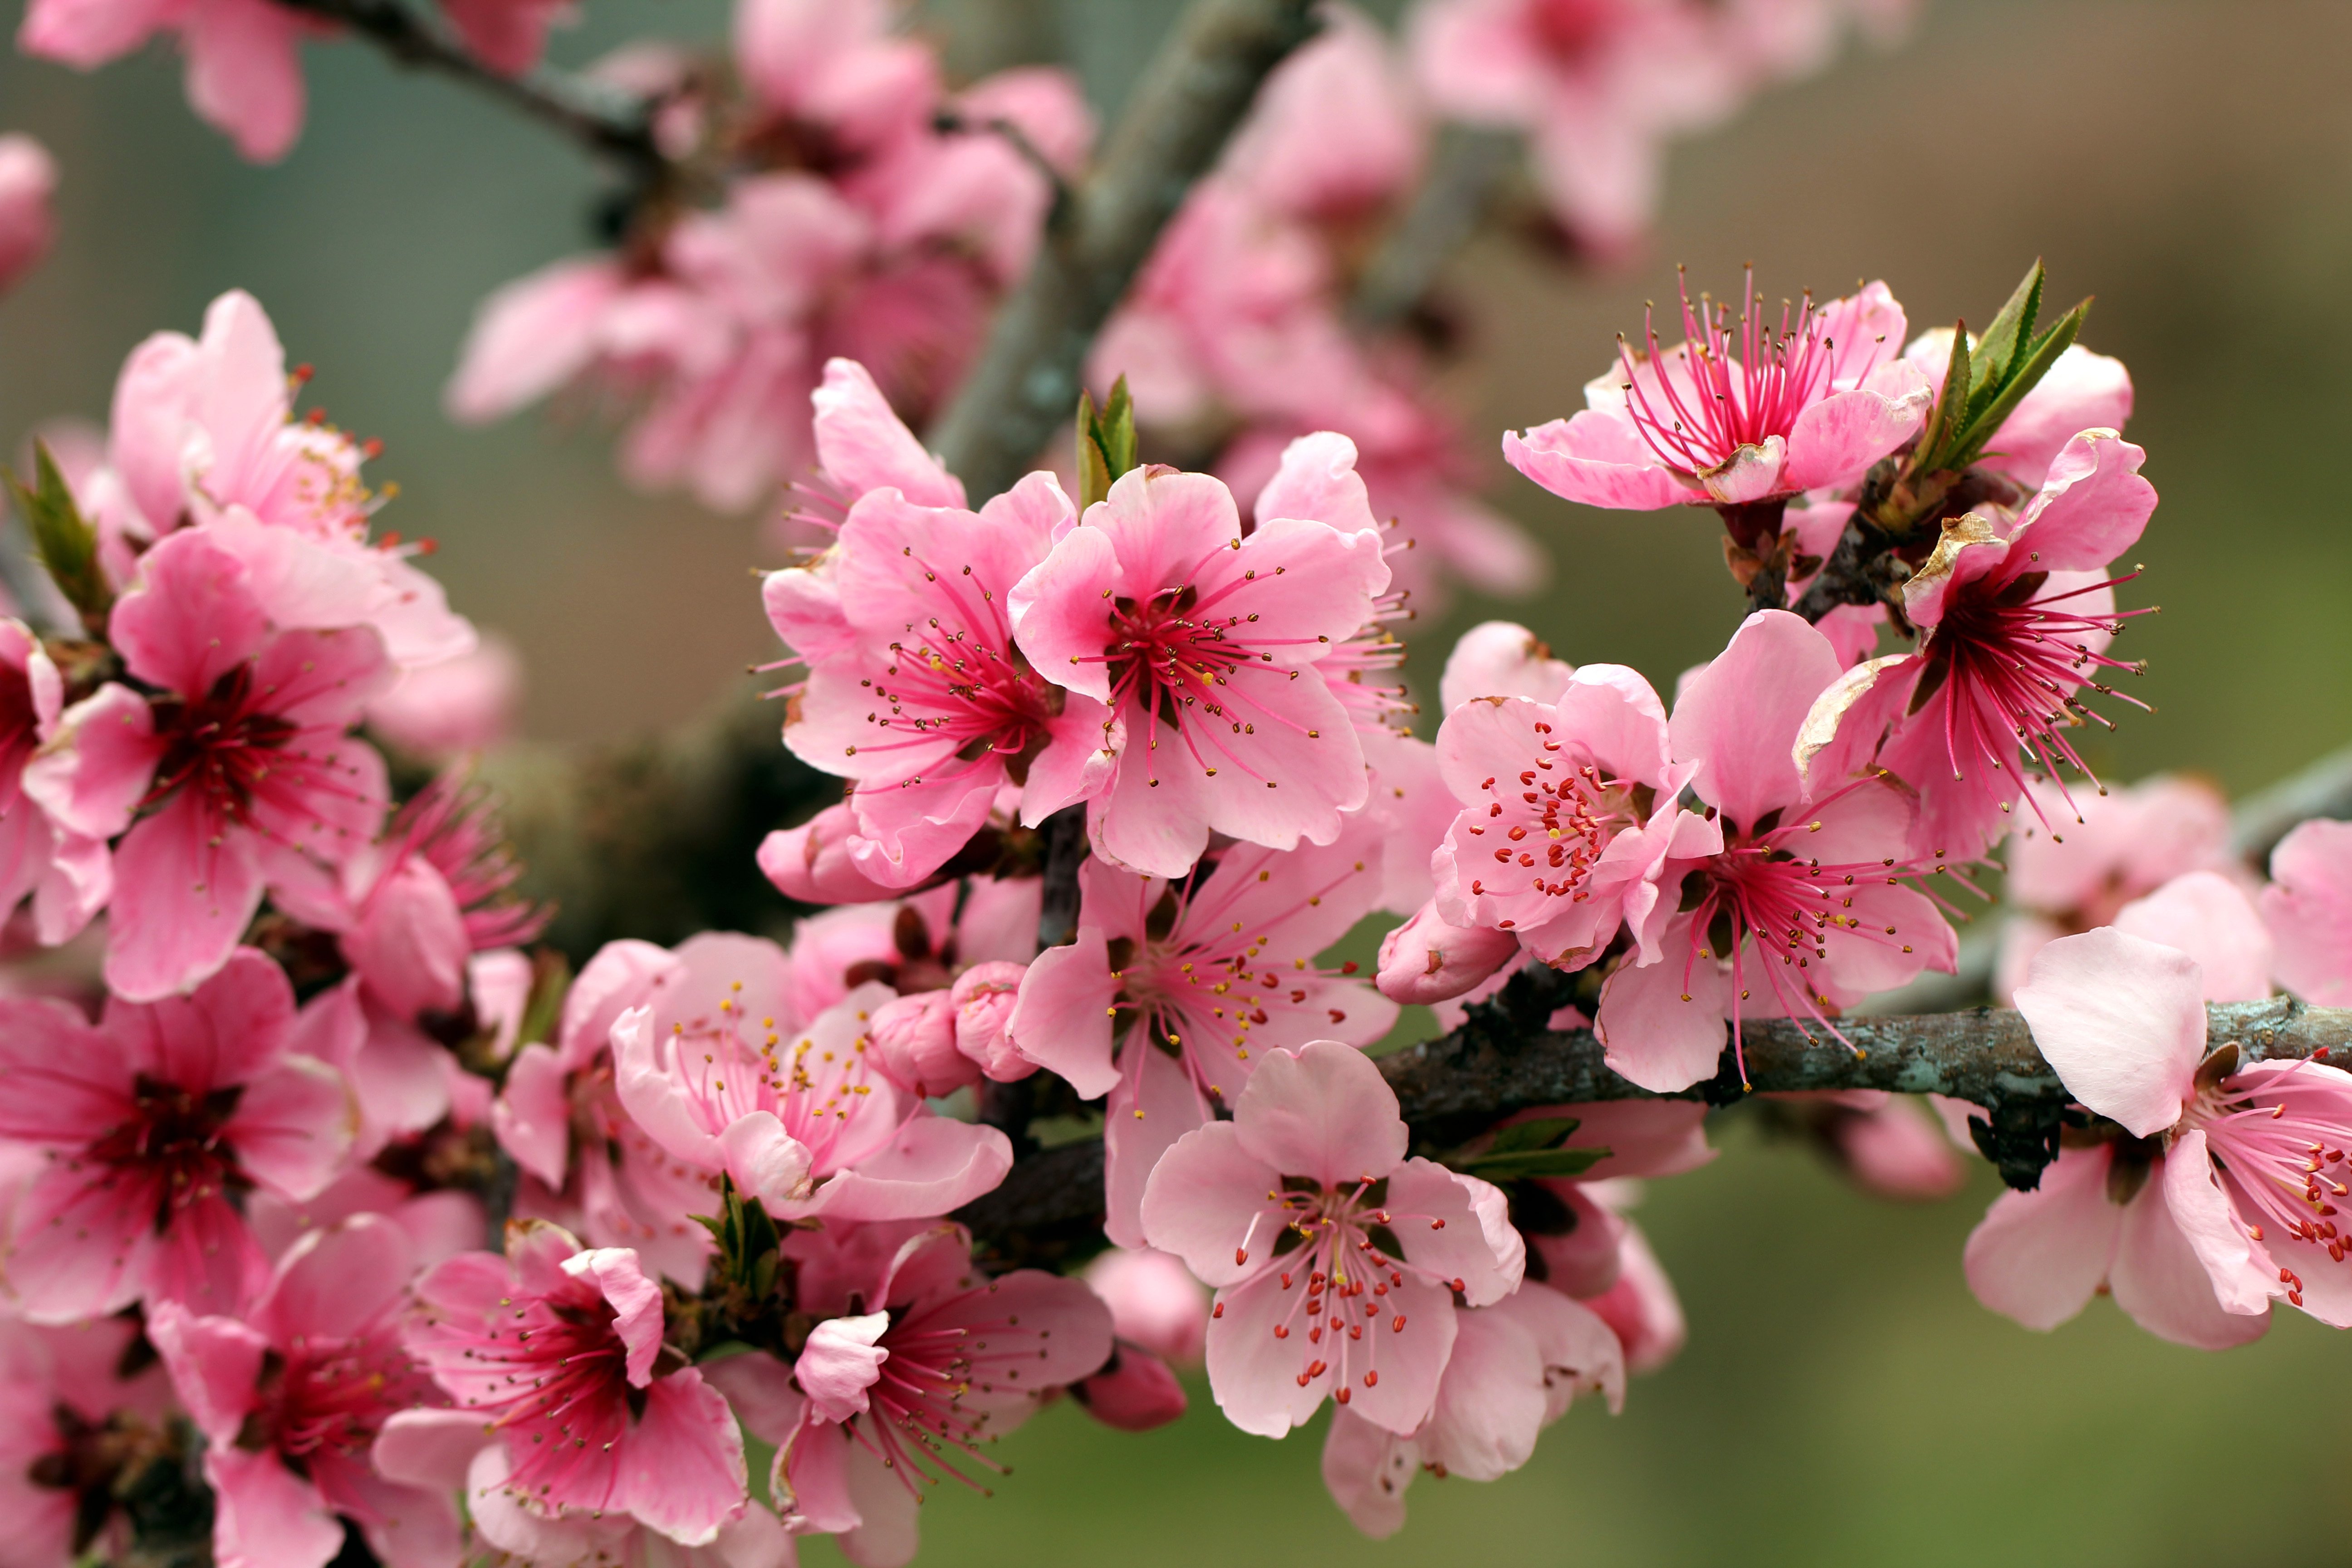 apple, Tree, Bright, Spring, Pink, Flowers, Petals, Blossoms, Tender Wallpaper HD / Desktop and Mobile Background